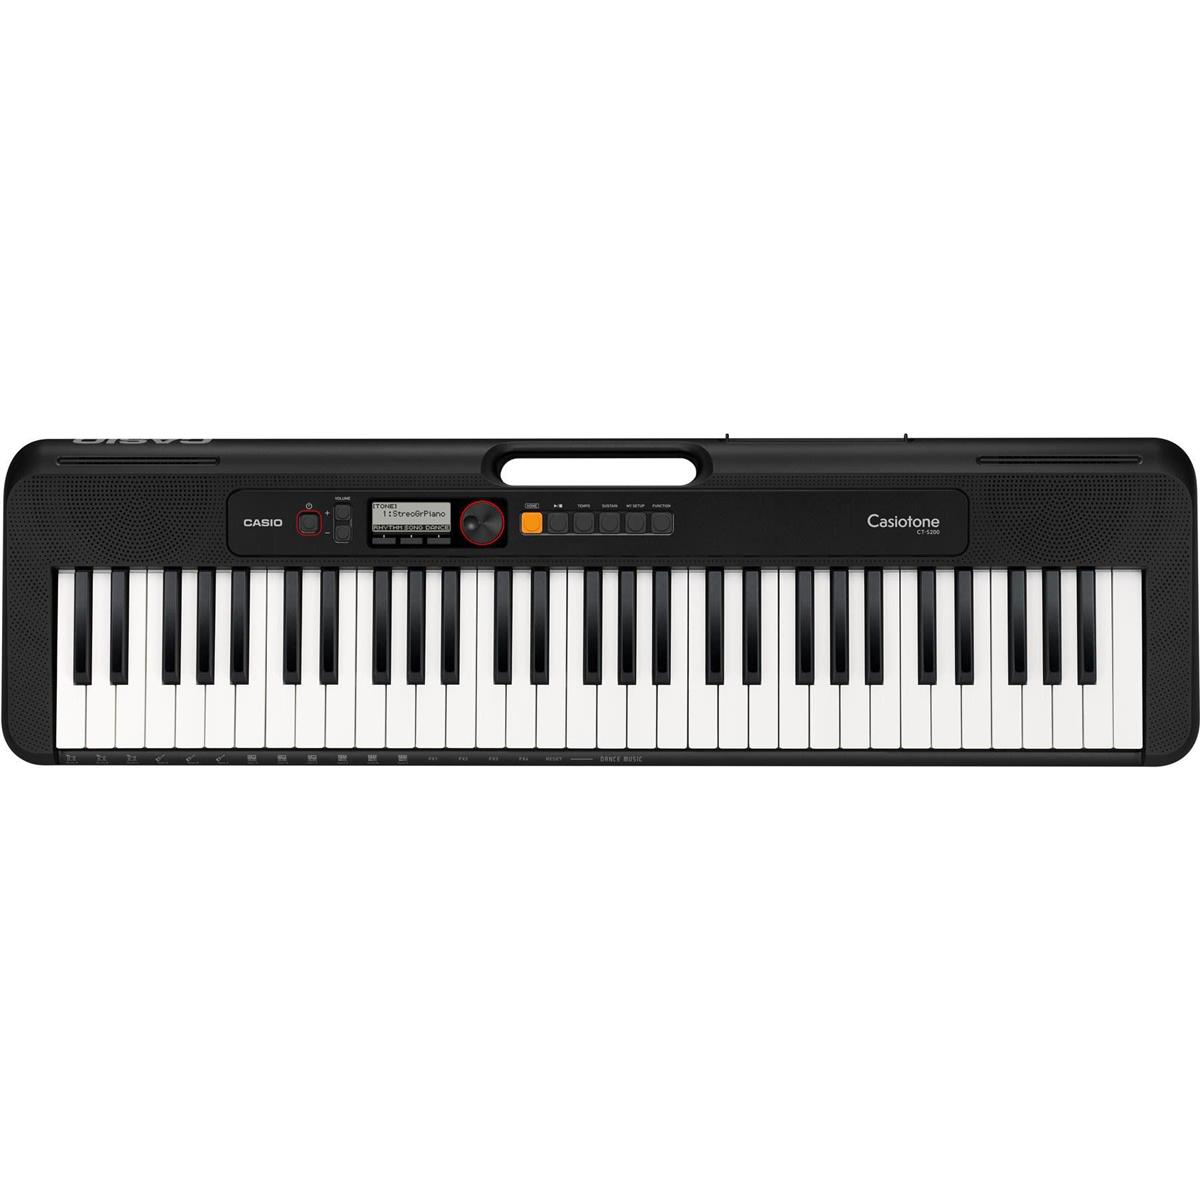 Casio CT-S200 61-Key Digital Piano Style Portable Keyboard (Select Colors)